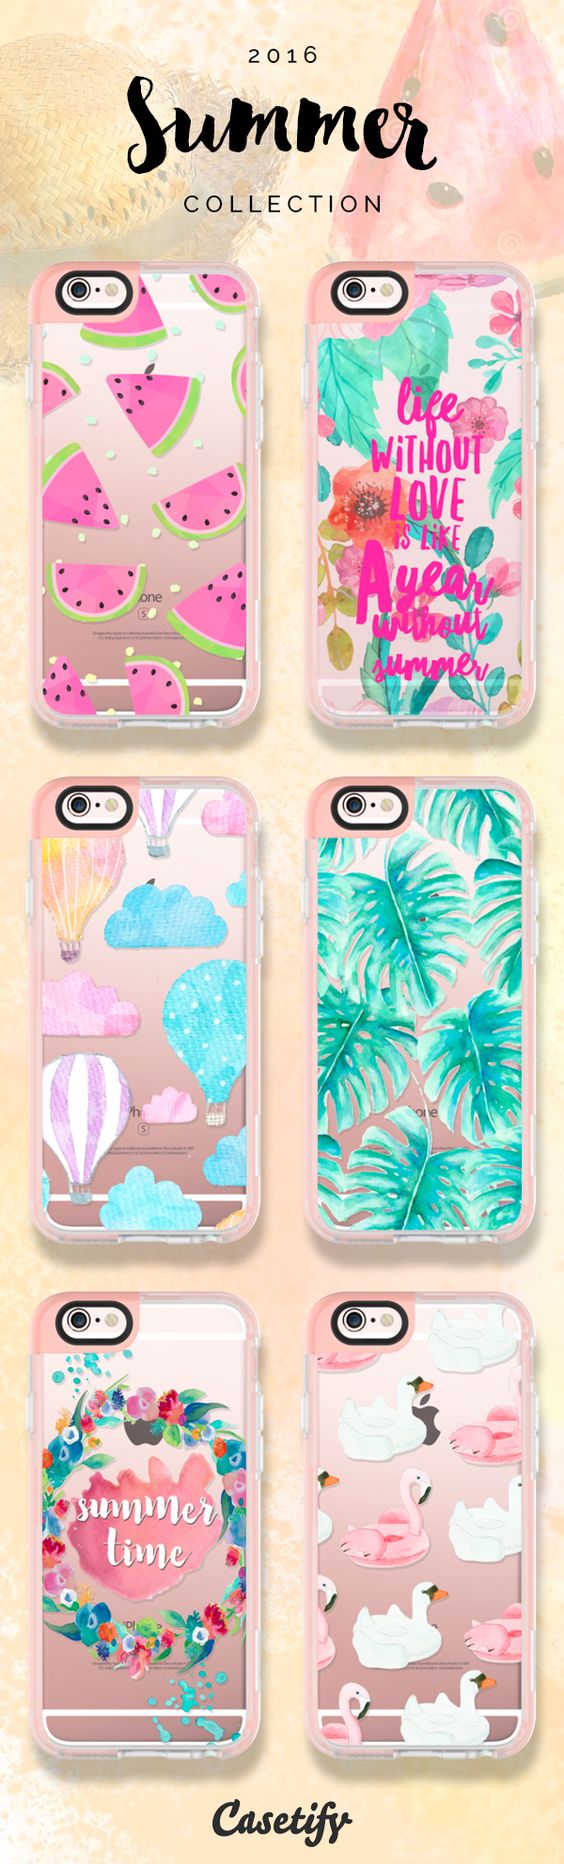 Let's have some fun in the sun! Click through to check out our latest 2016 #summer collection   | @Casetify